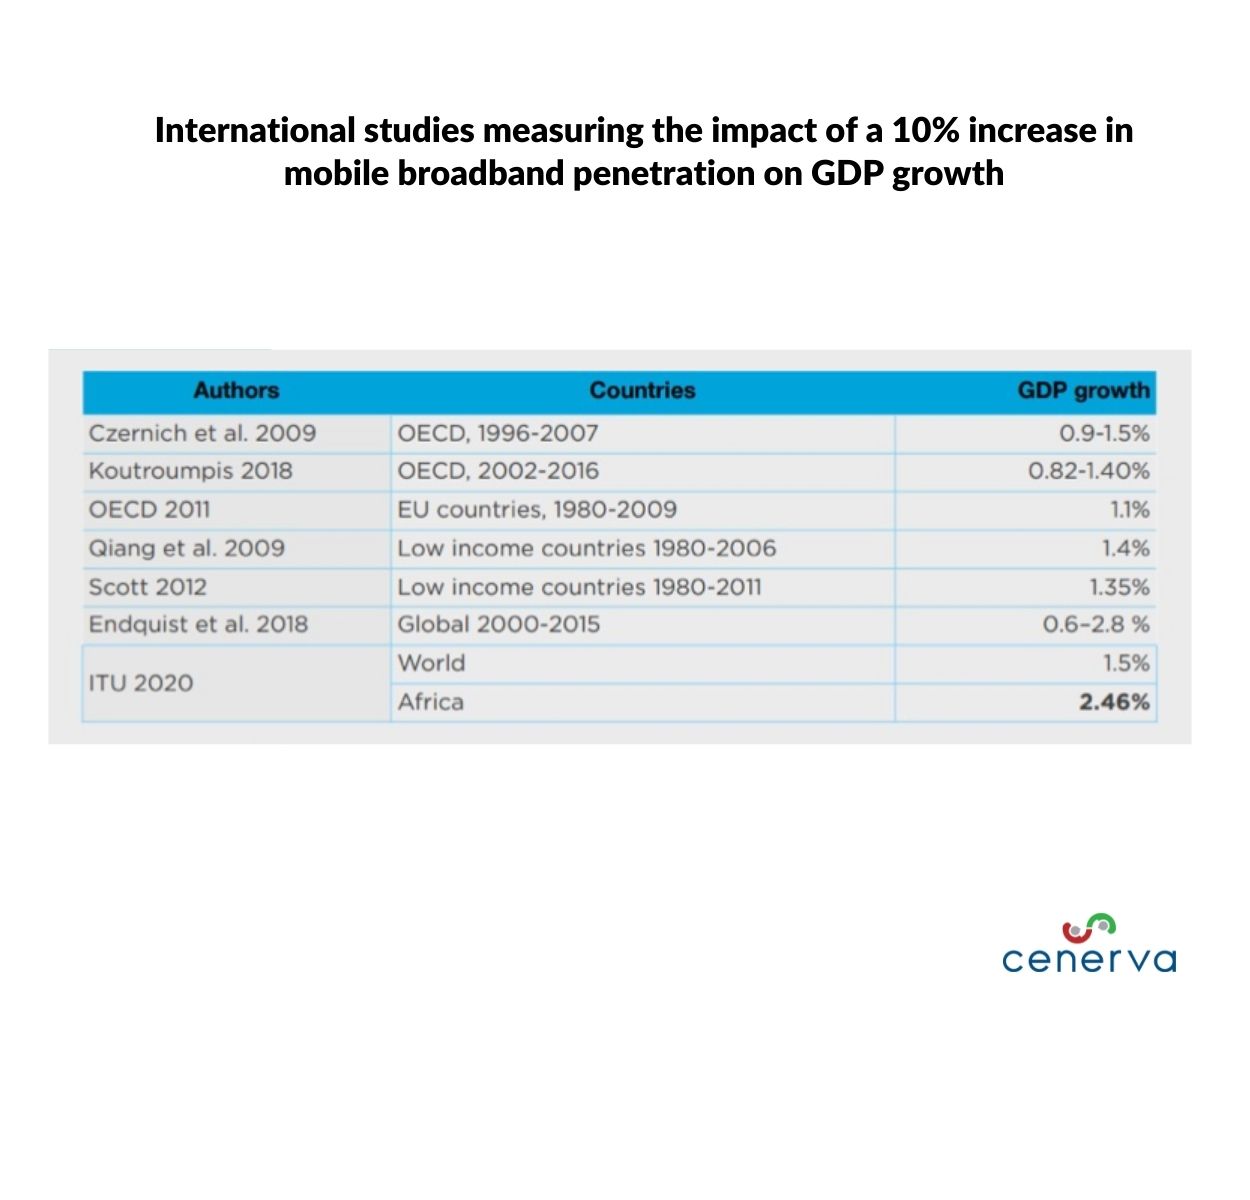 International studies measuring the impact of a 10% increase in mobile broadband penetration on GDP growth